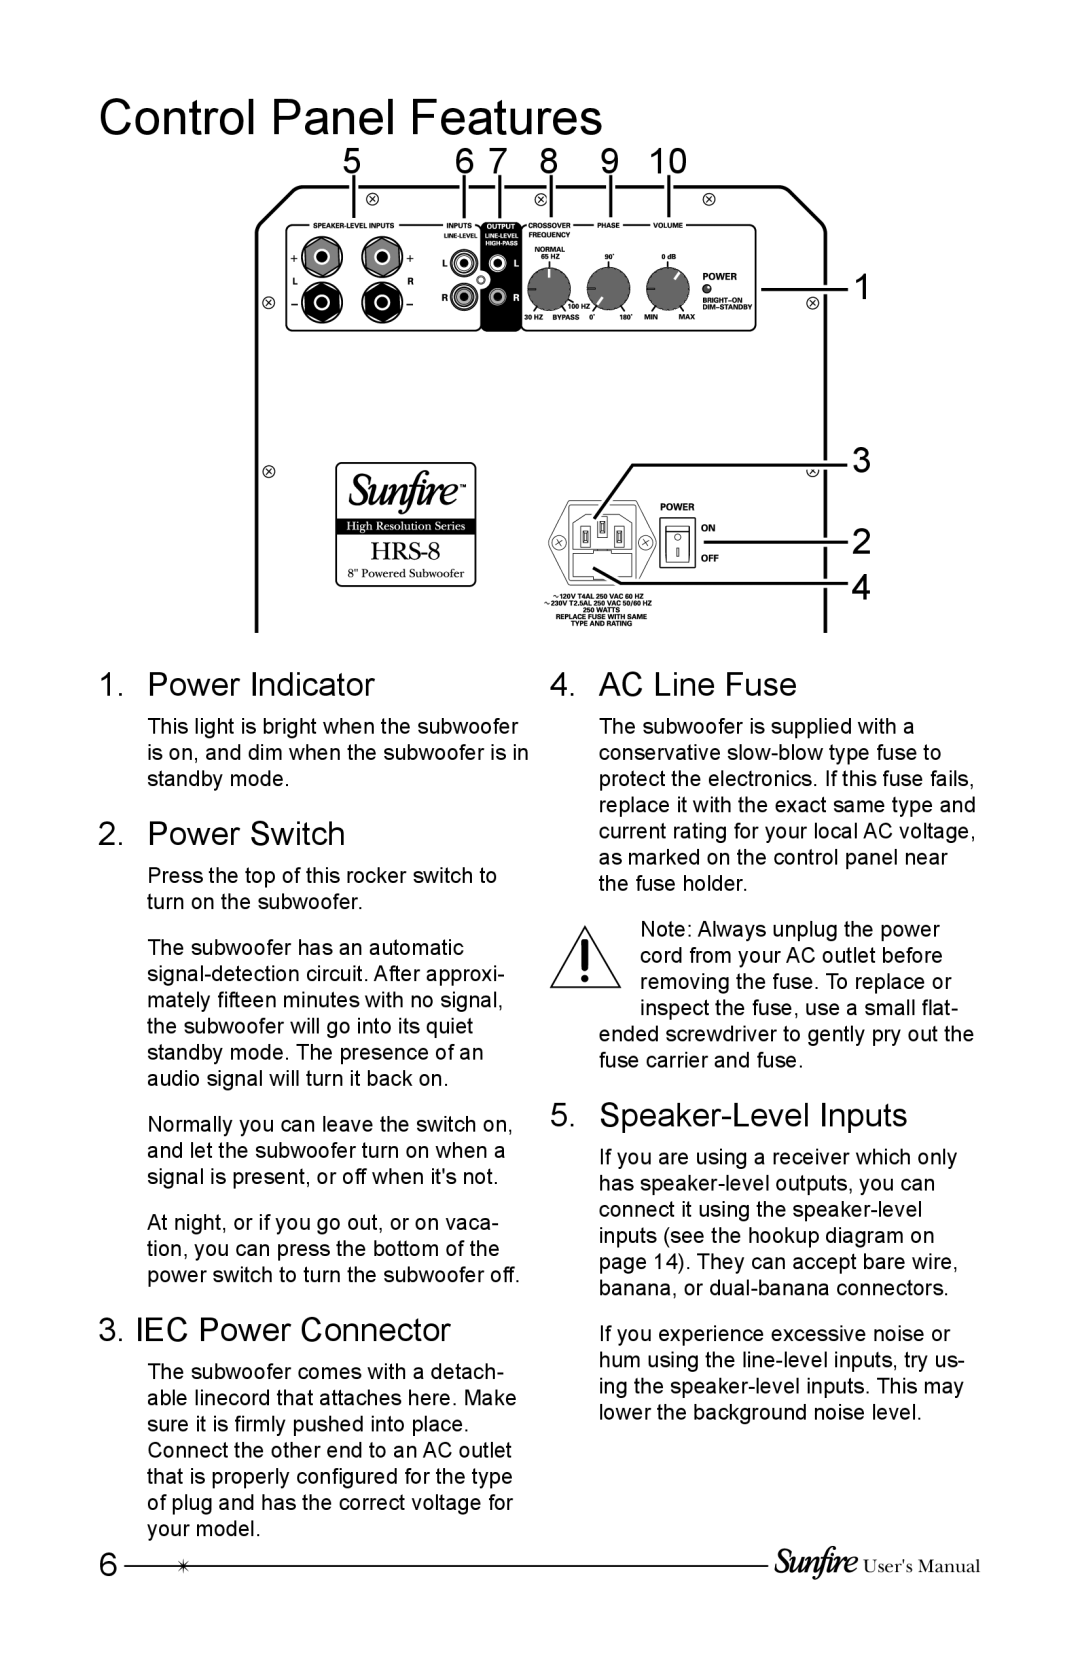 Sunfire HRS-8, HRS-10 Control Panel Features, 5 6 7 8 9, Power Indicator, Power Switch, AC Line Fuse, IEC Power Connector 